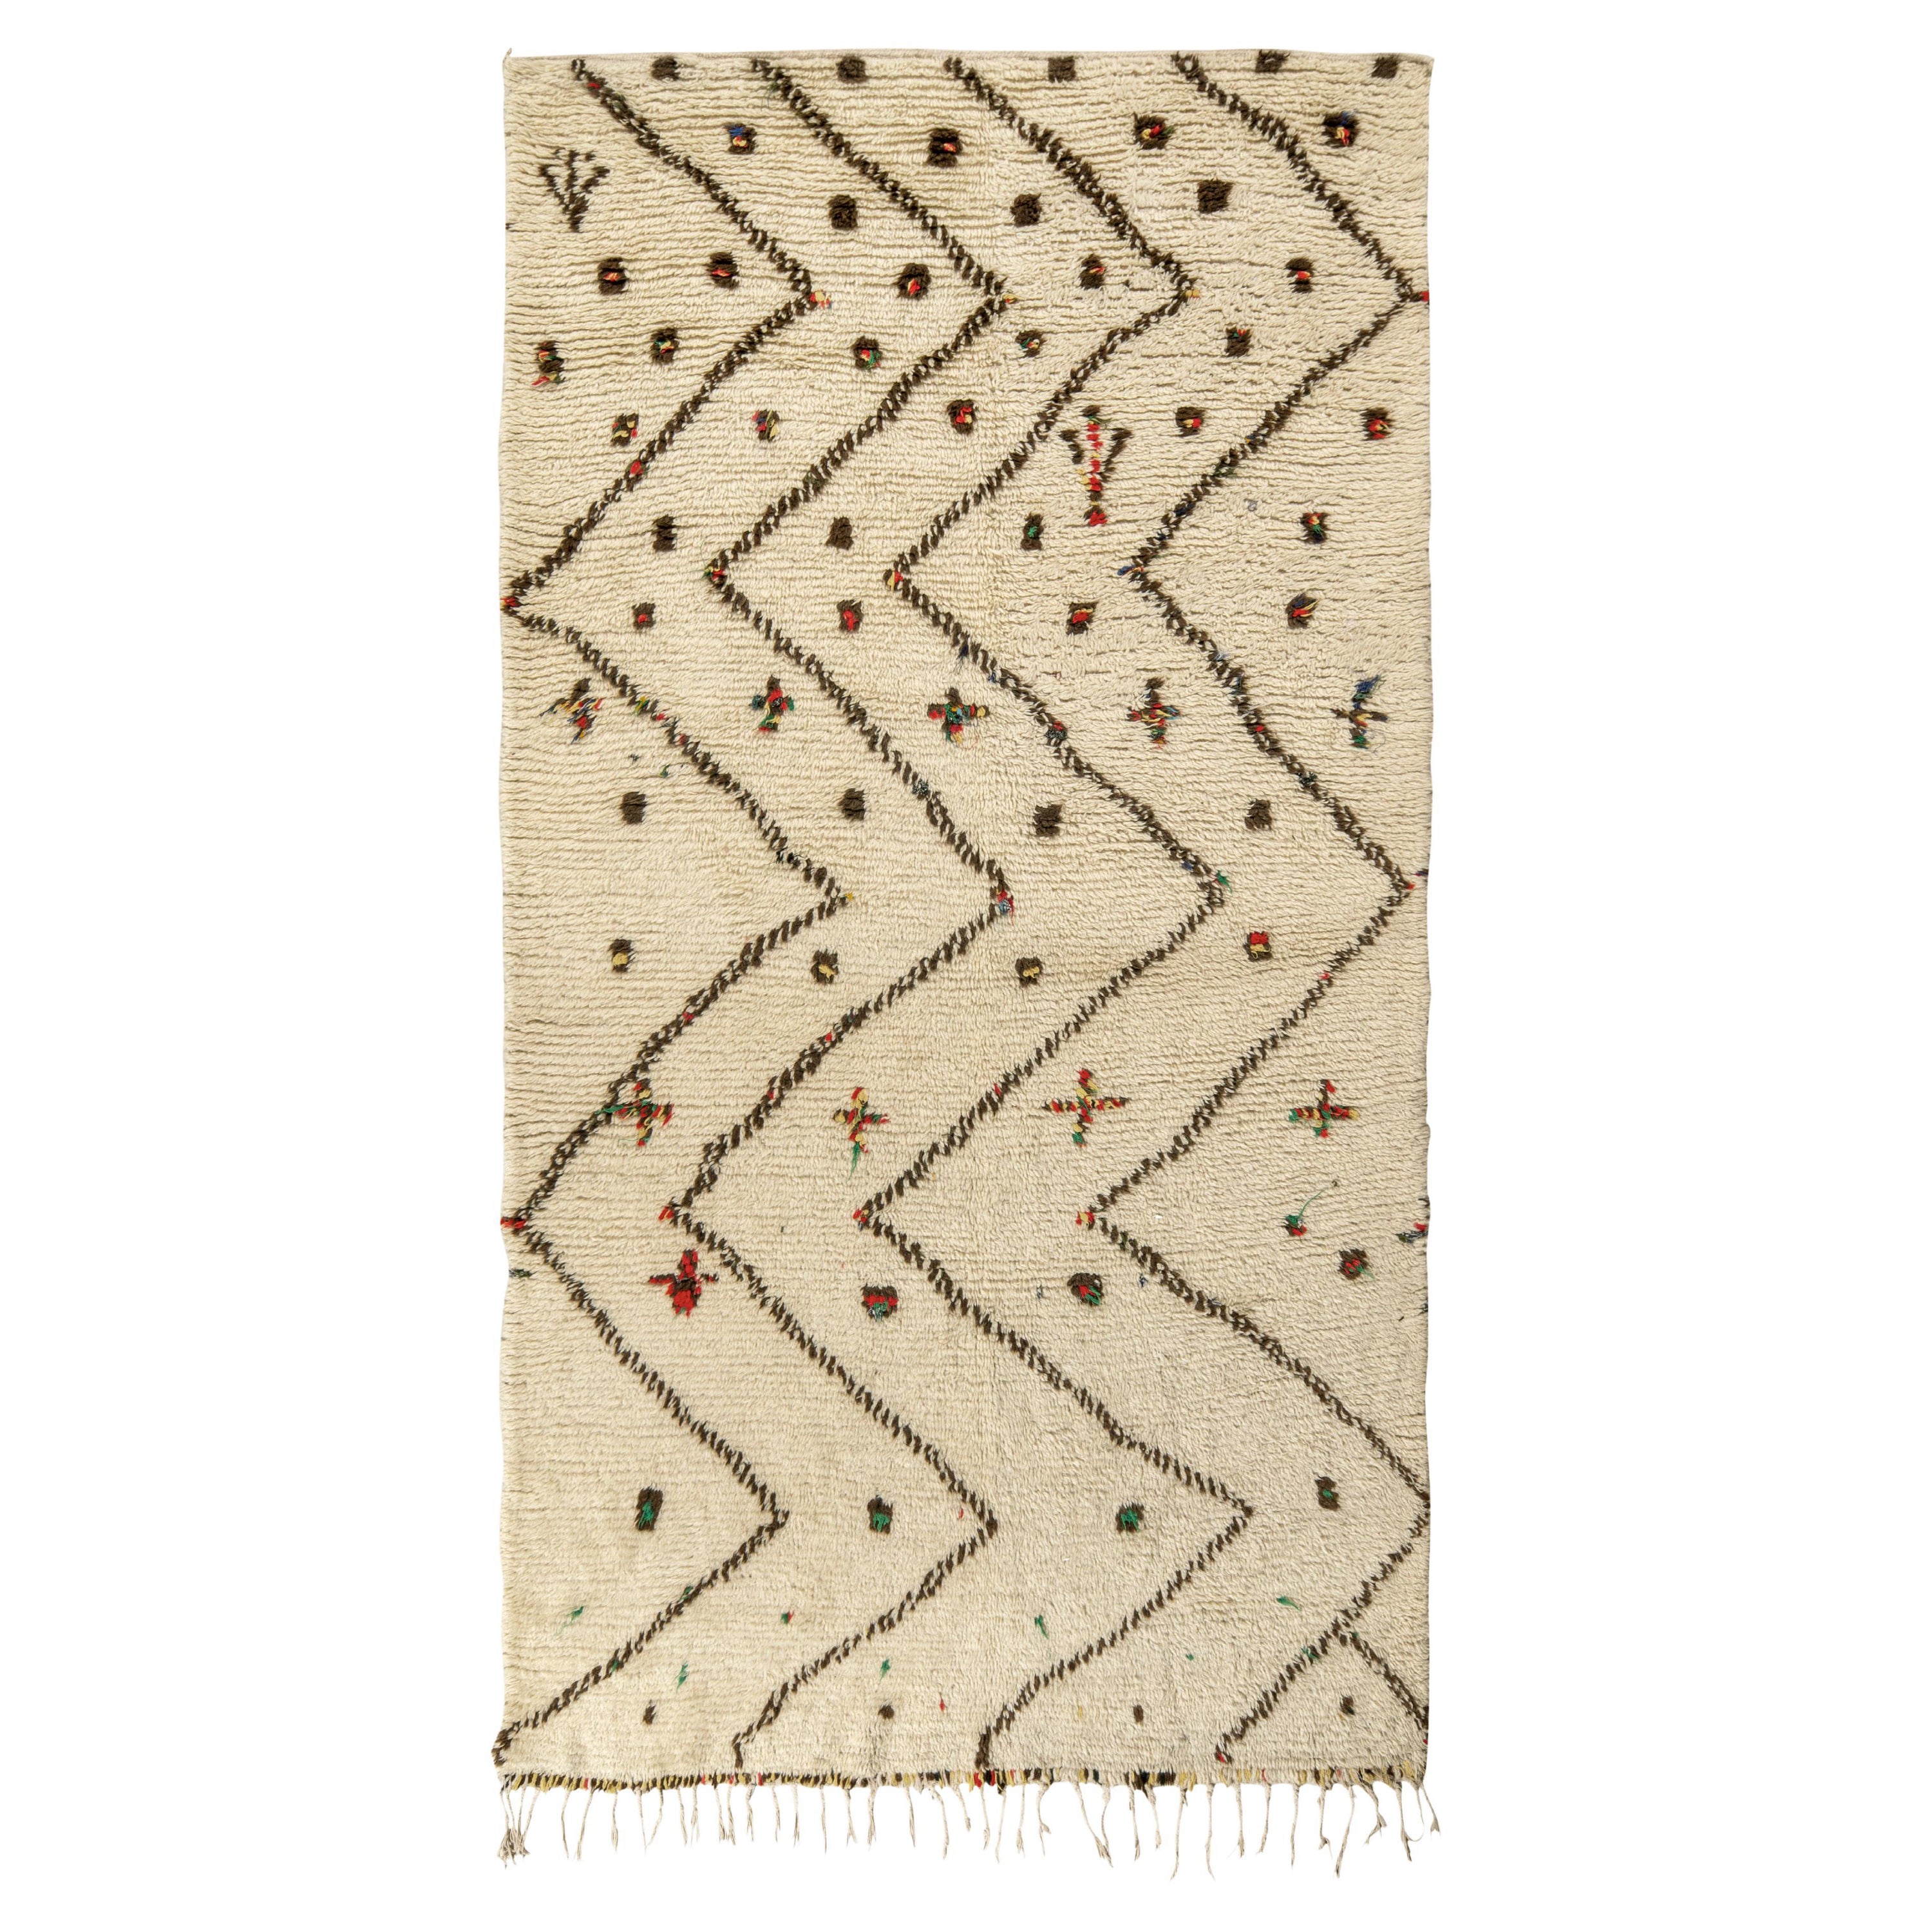 Hand-Knotted Moroccan Berber Rug, Beige-Brown Zig-Zag Pattern by Rug & Kilim